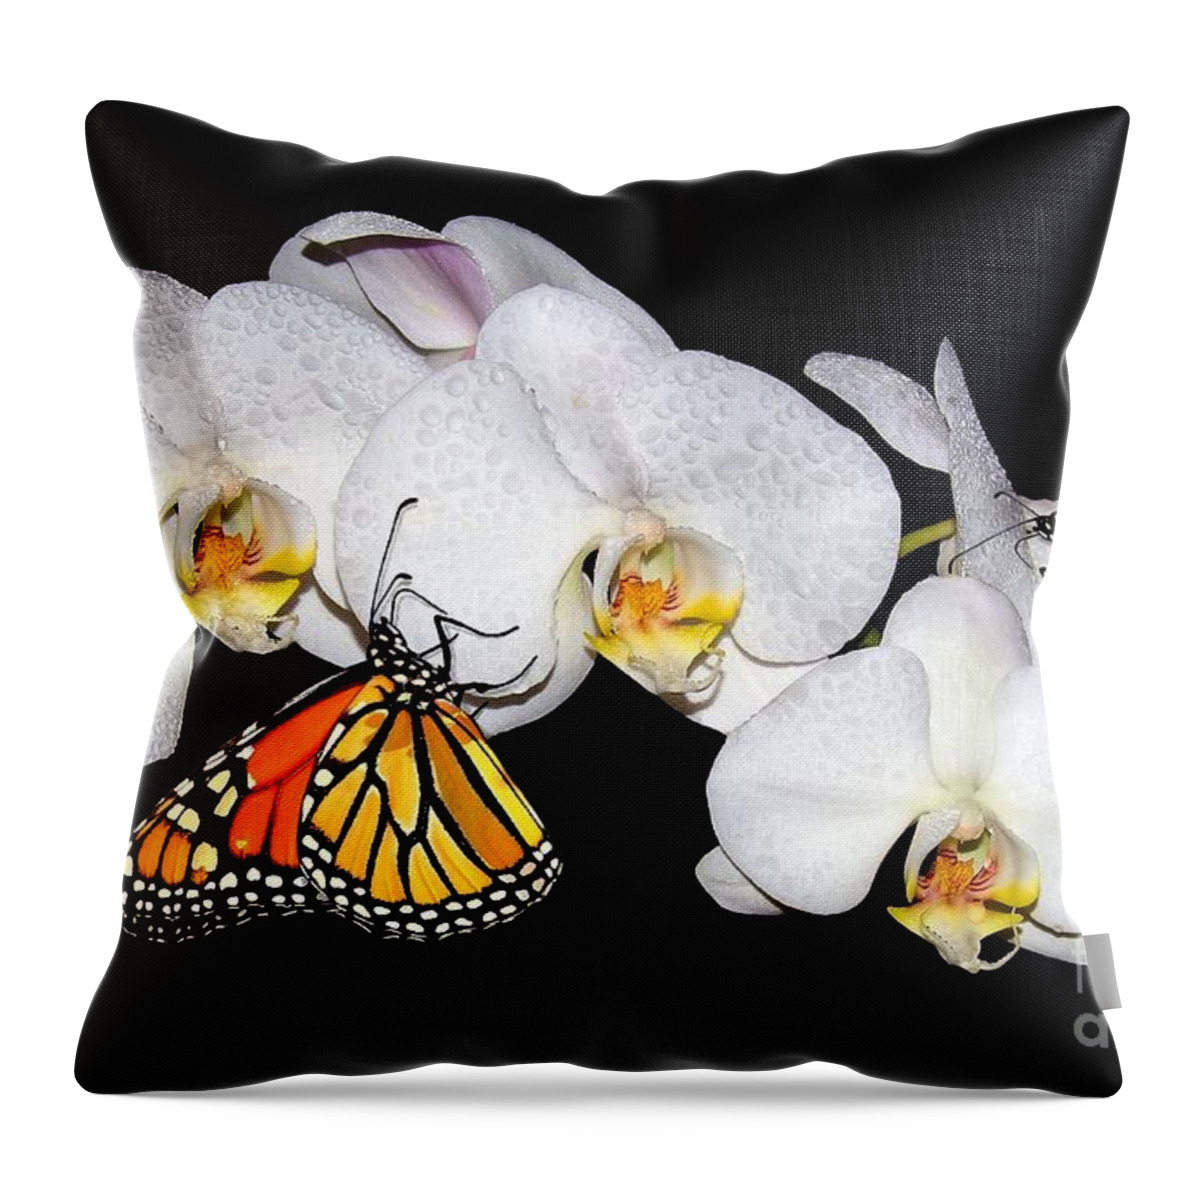  Throw Pillow featuring the photograph Thirsty Butterflies by Patrick Witz